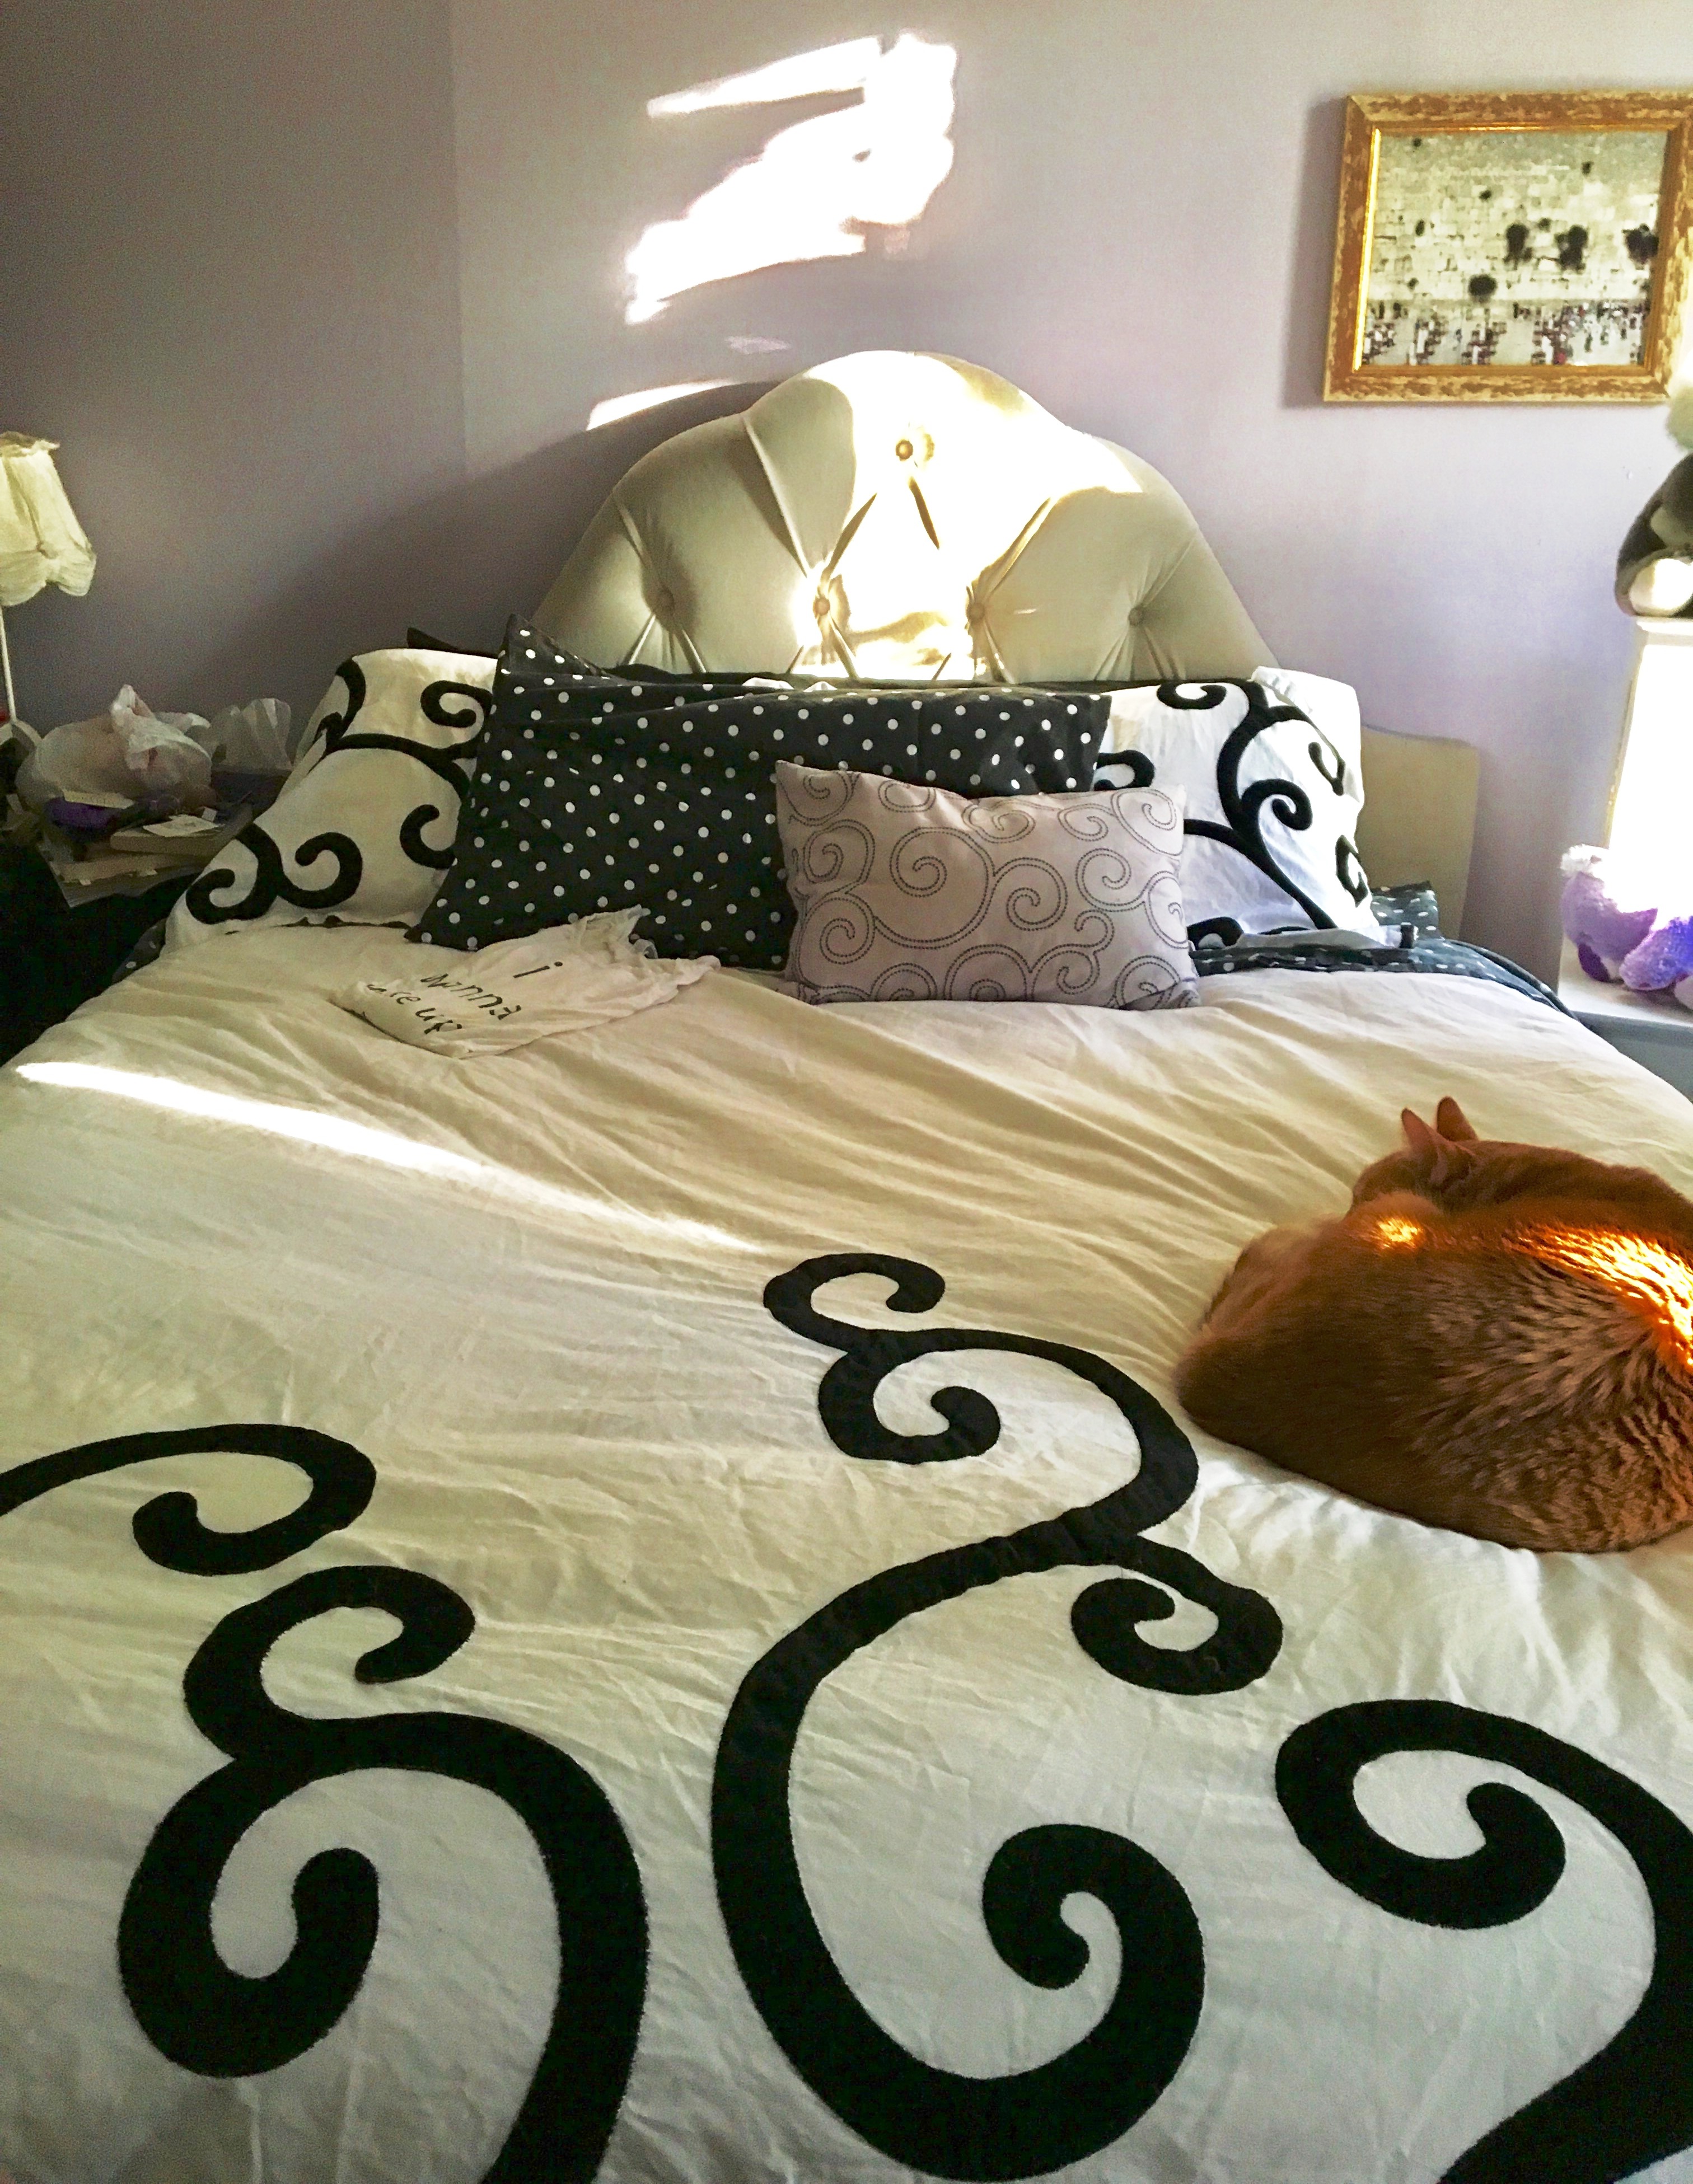 We put fresh sheets on the bed.jpg